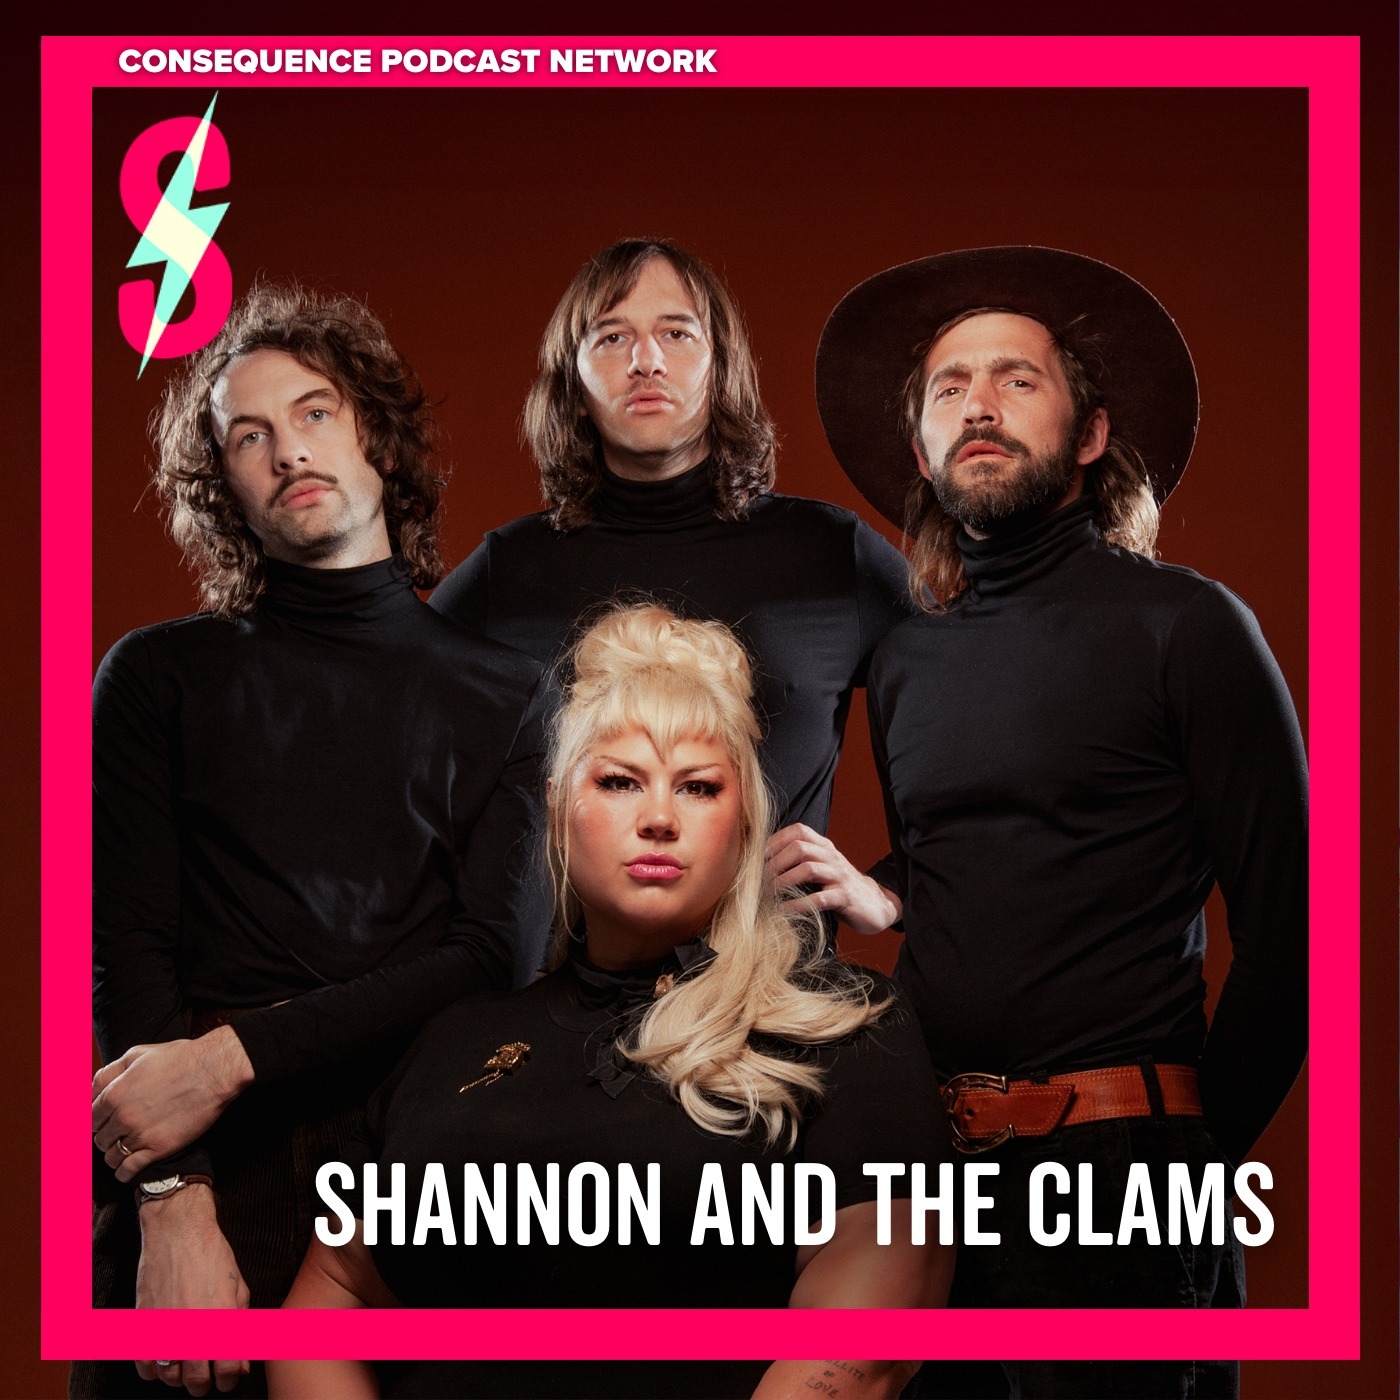 Shannon And The Clams' Spark is Patsy Cline's 12 Greatest Hits